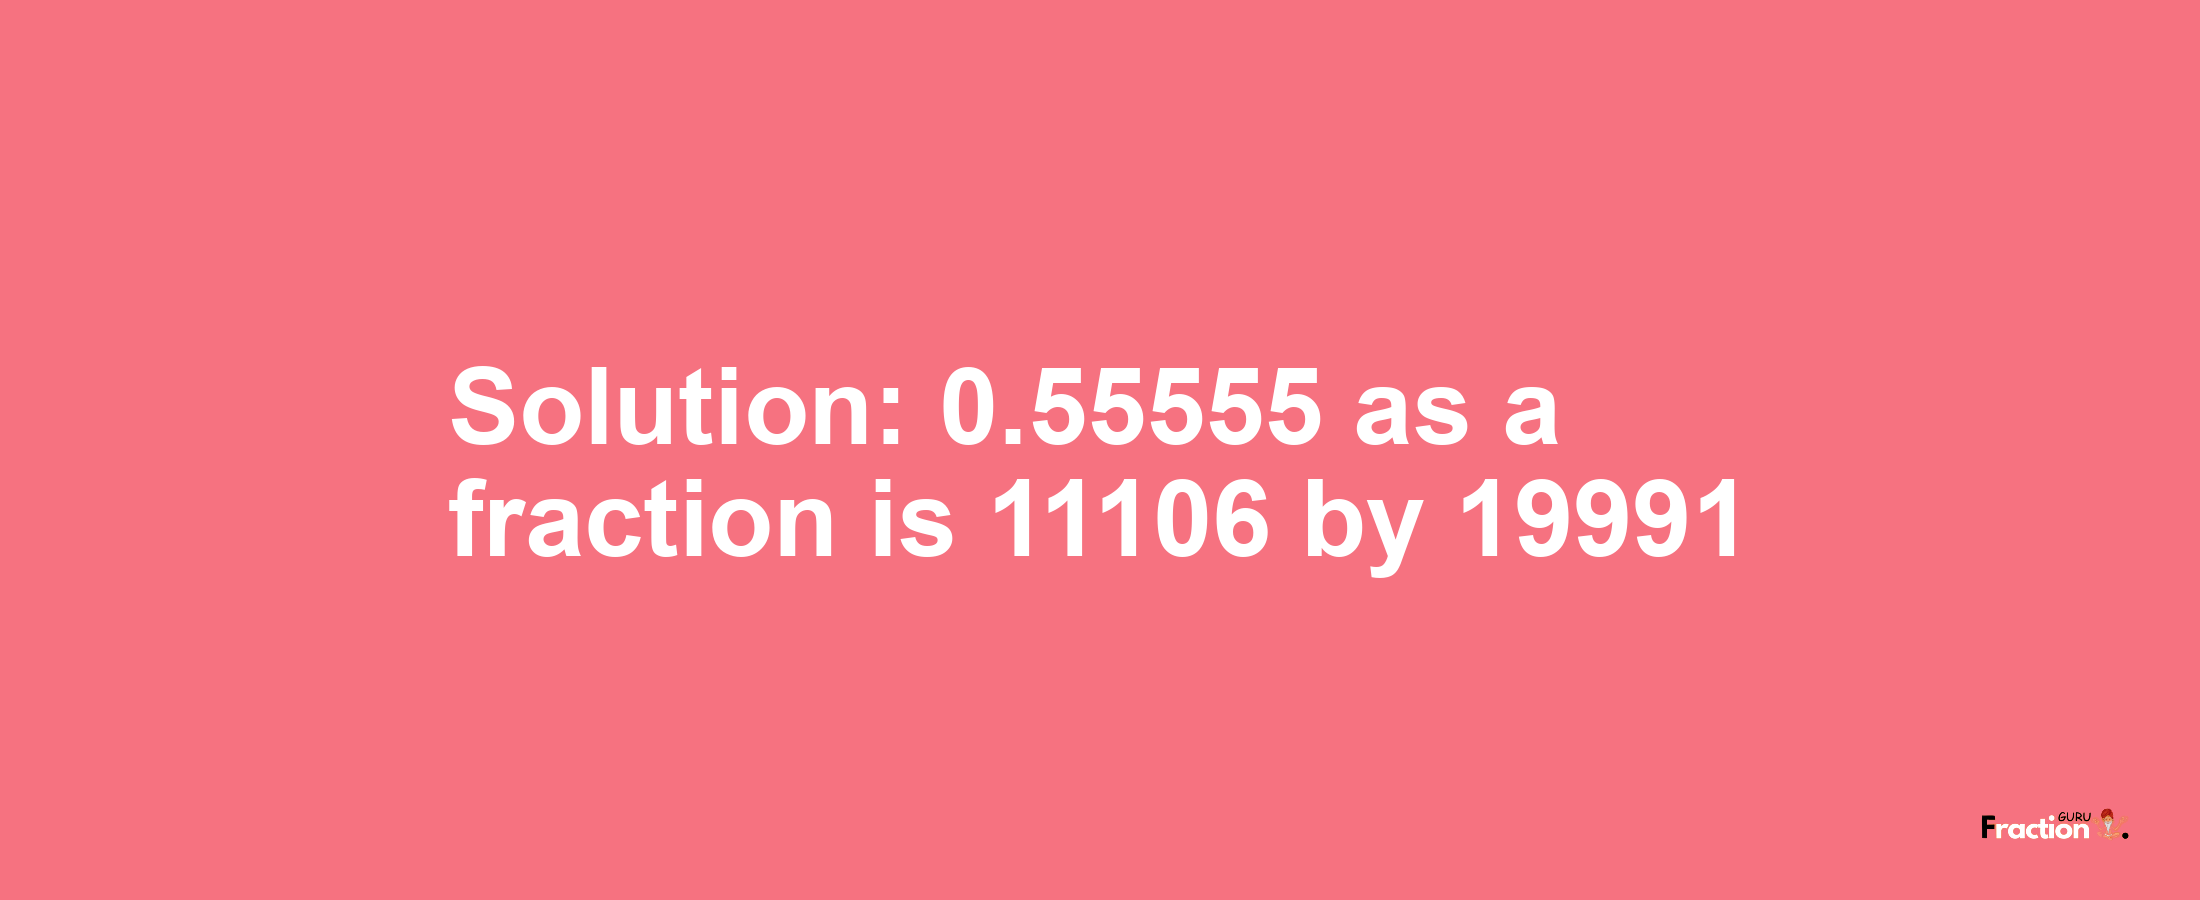 Solution:0.55555 as a fraction is 11106/19991